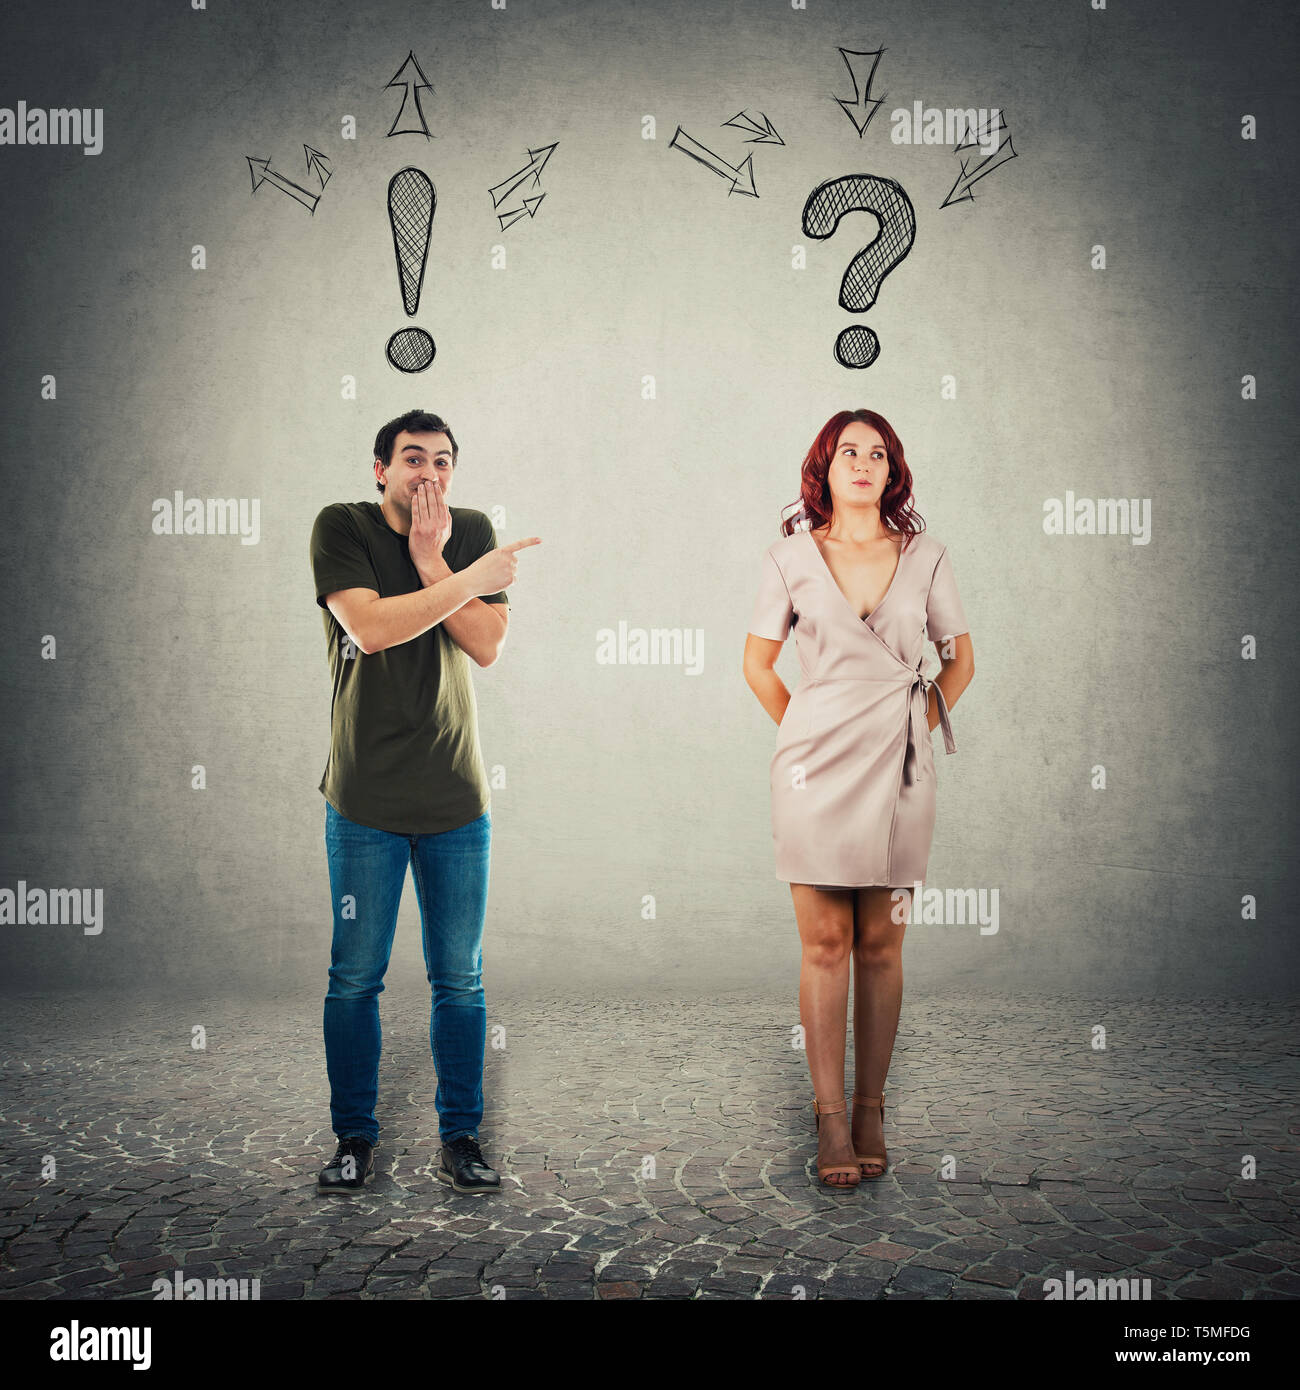 Amused man extrovert, with exclamation sign over head, pointing forefinger to an ashamed woman introvert. Worried girl feeling guilty looking aside ha Stock Photo